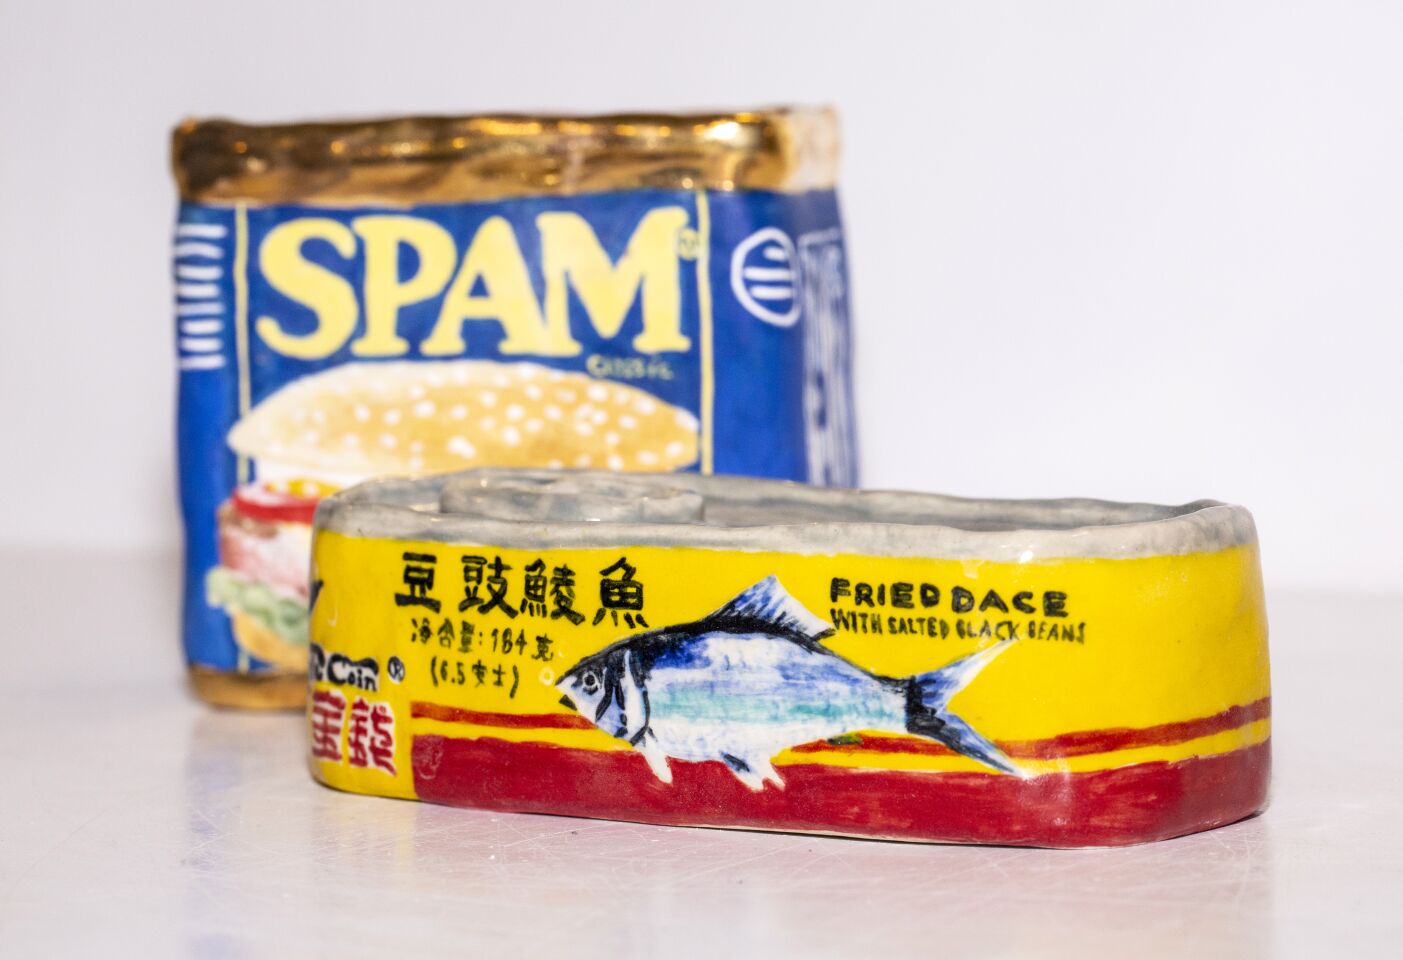 Ceramic canned food